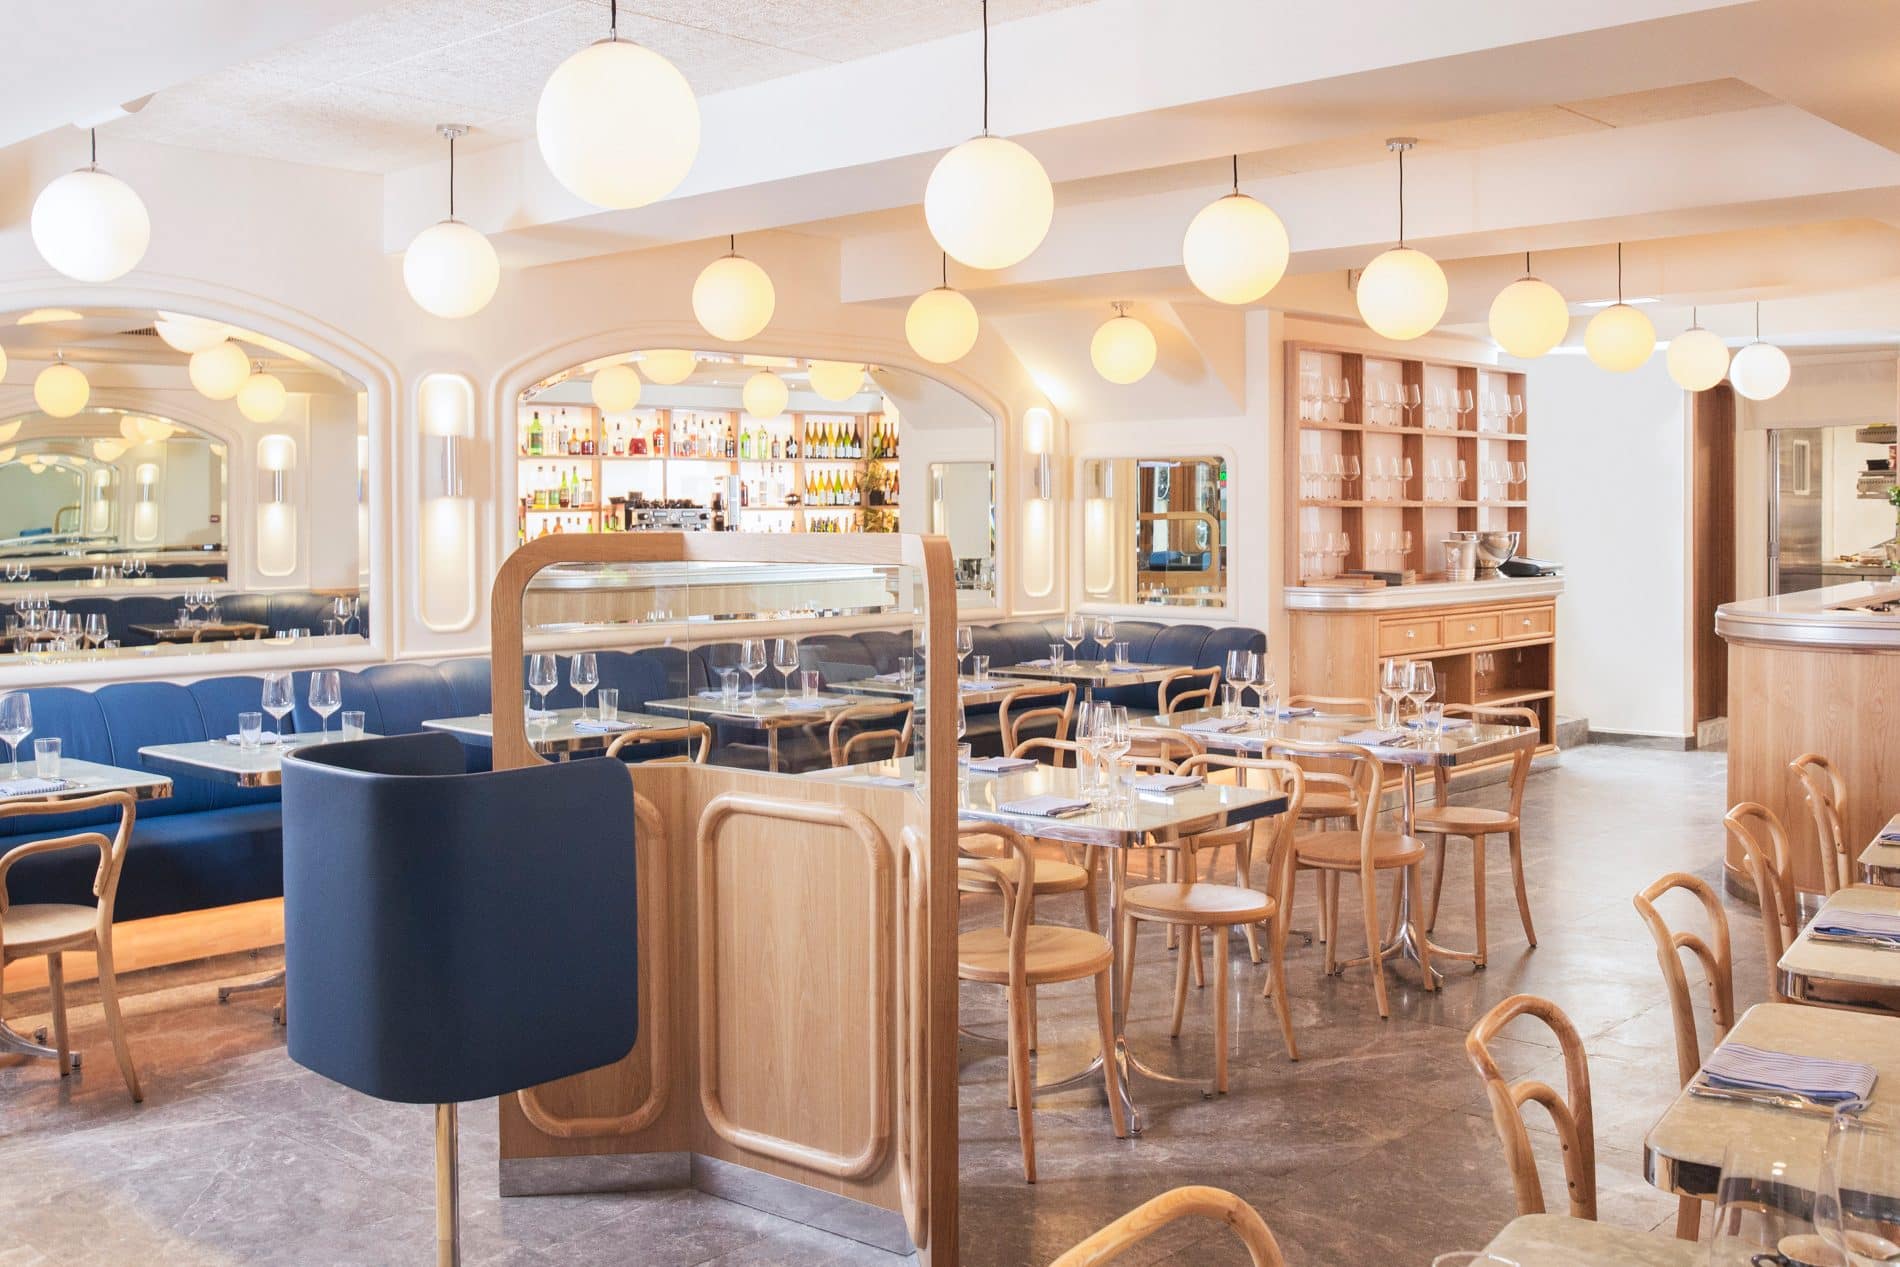 The modern brasserie interiors including blue leather booths and wooden tables at Belon, Hong Kong